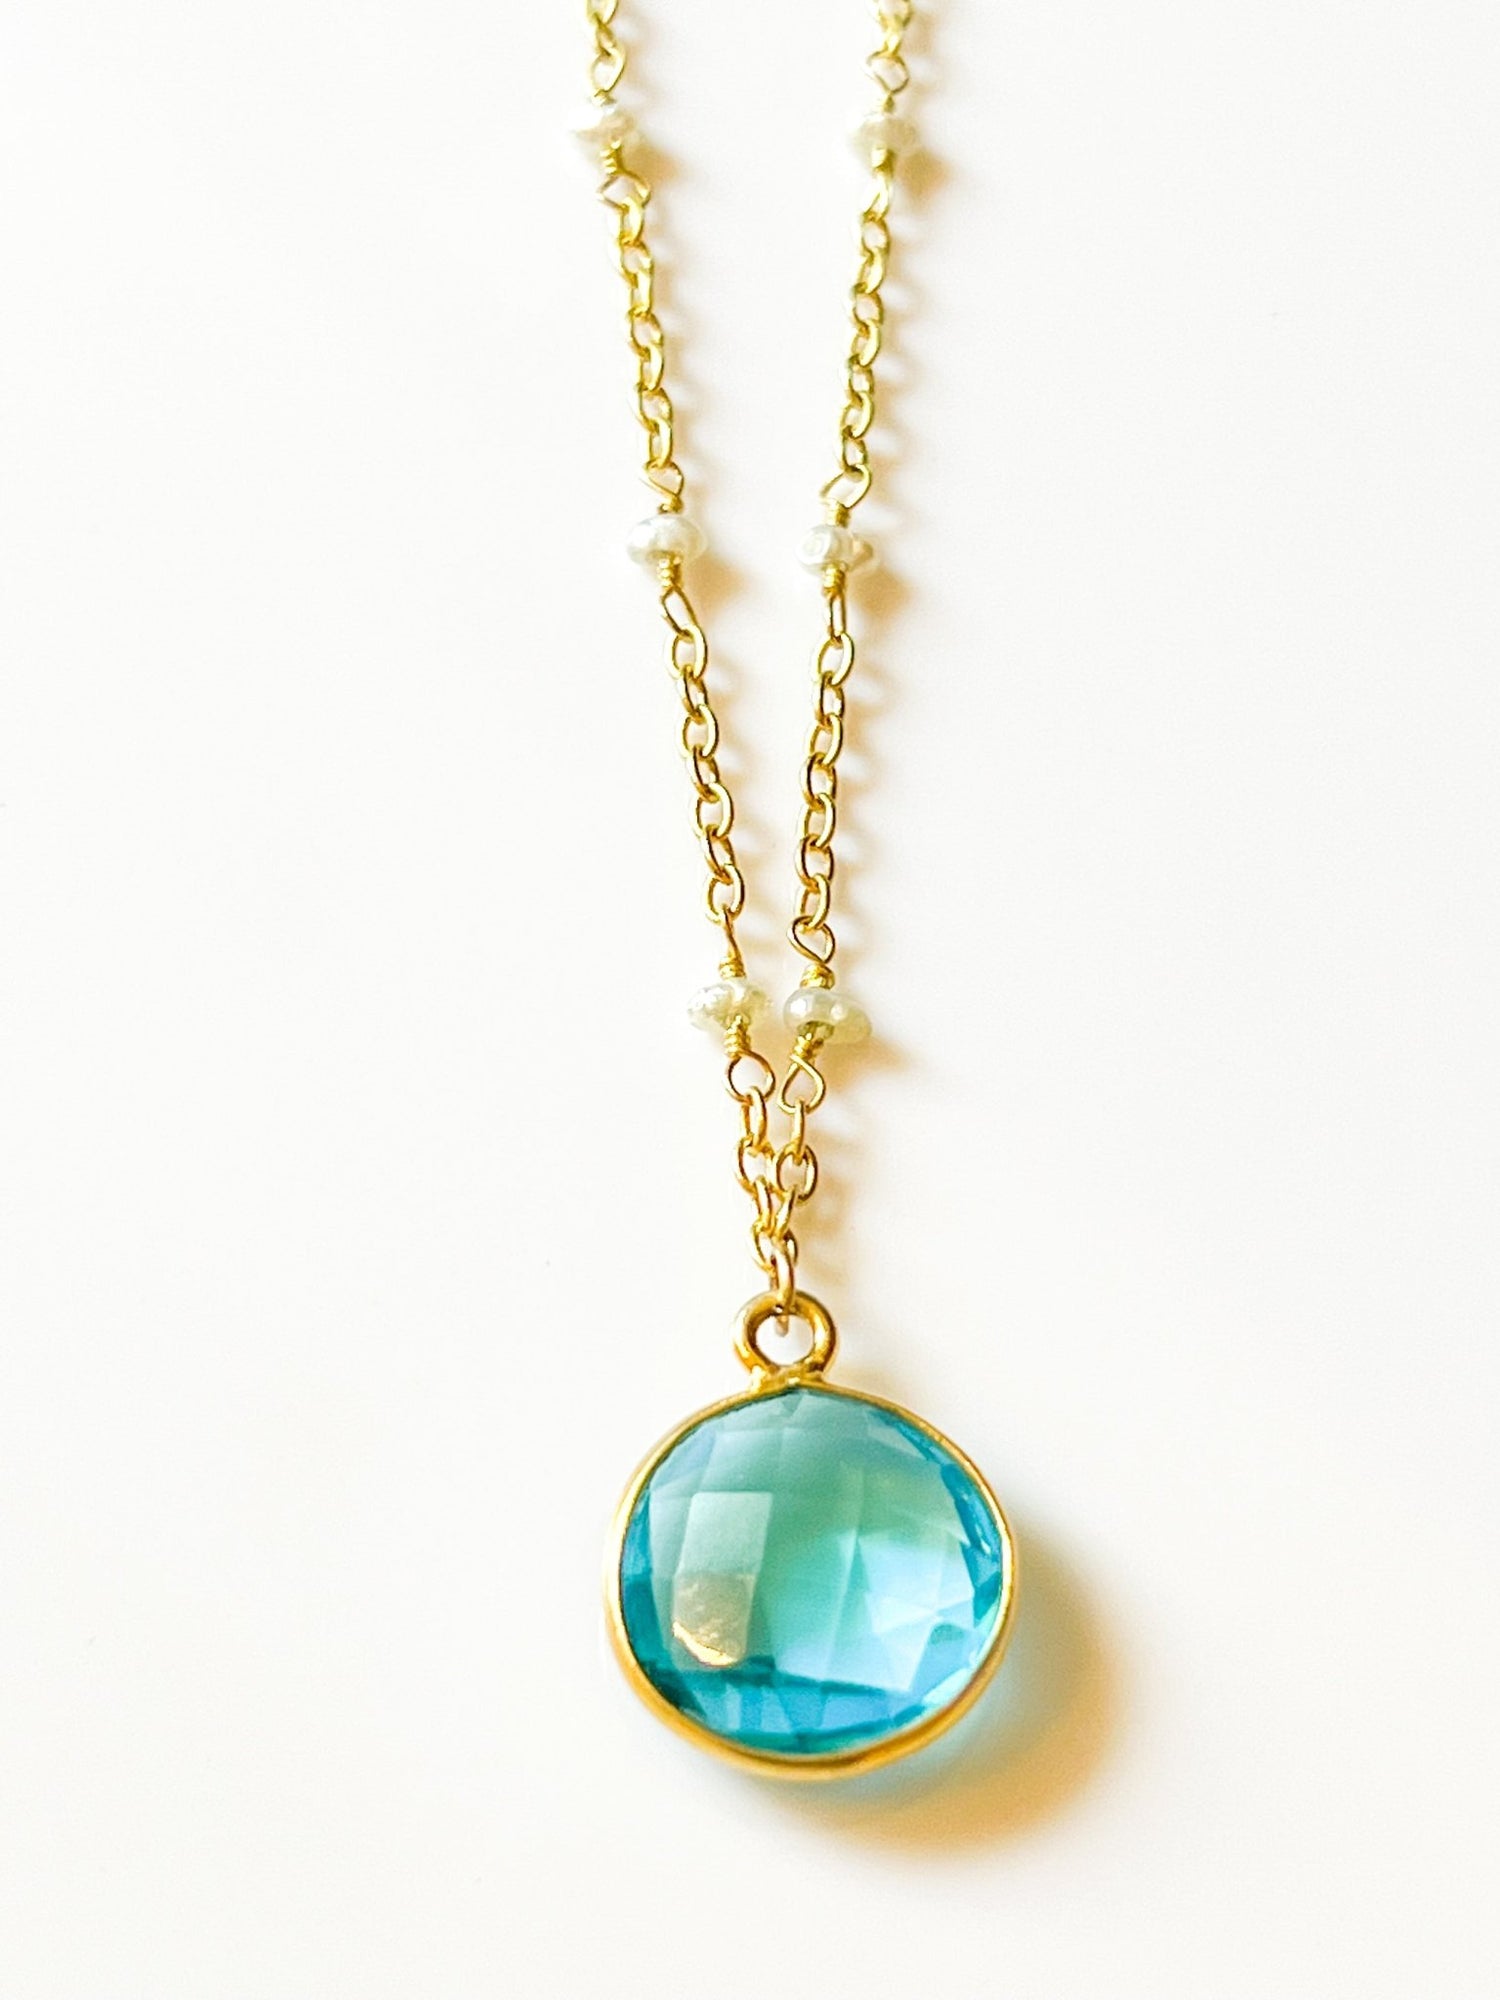 Electric Blue Topaz Charm Drop Necklace on Gold Chain with Freshwater Pearls by Sage Machado - The Sage Lifestyle